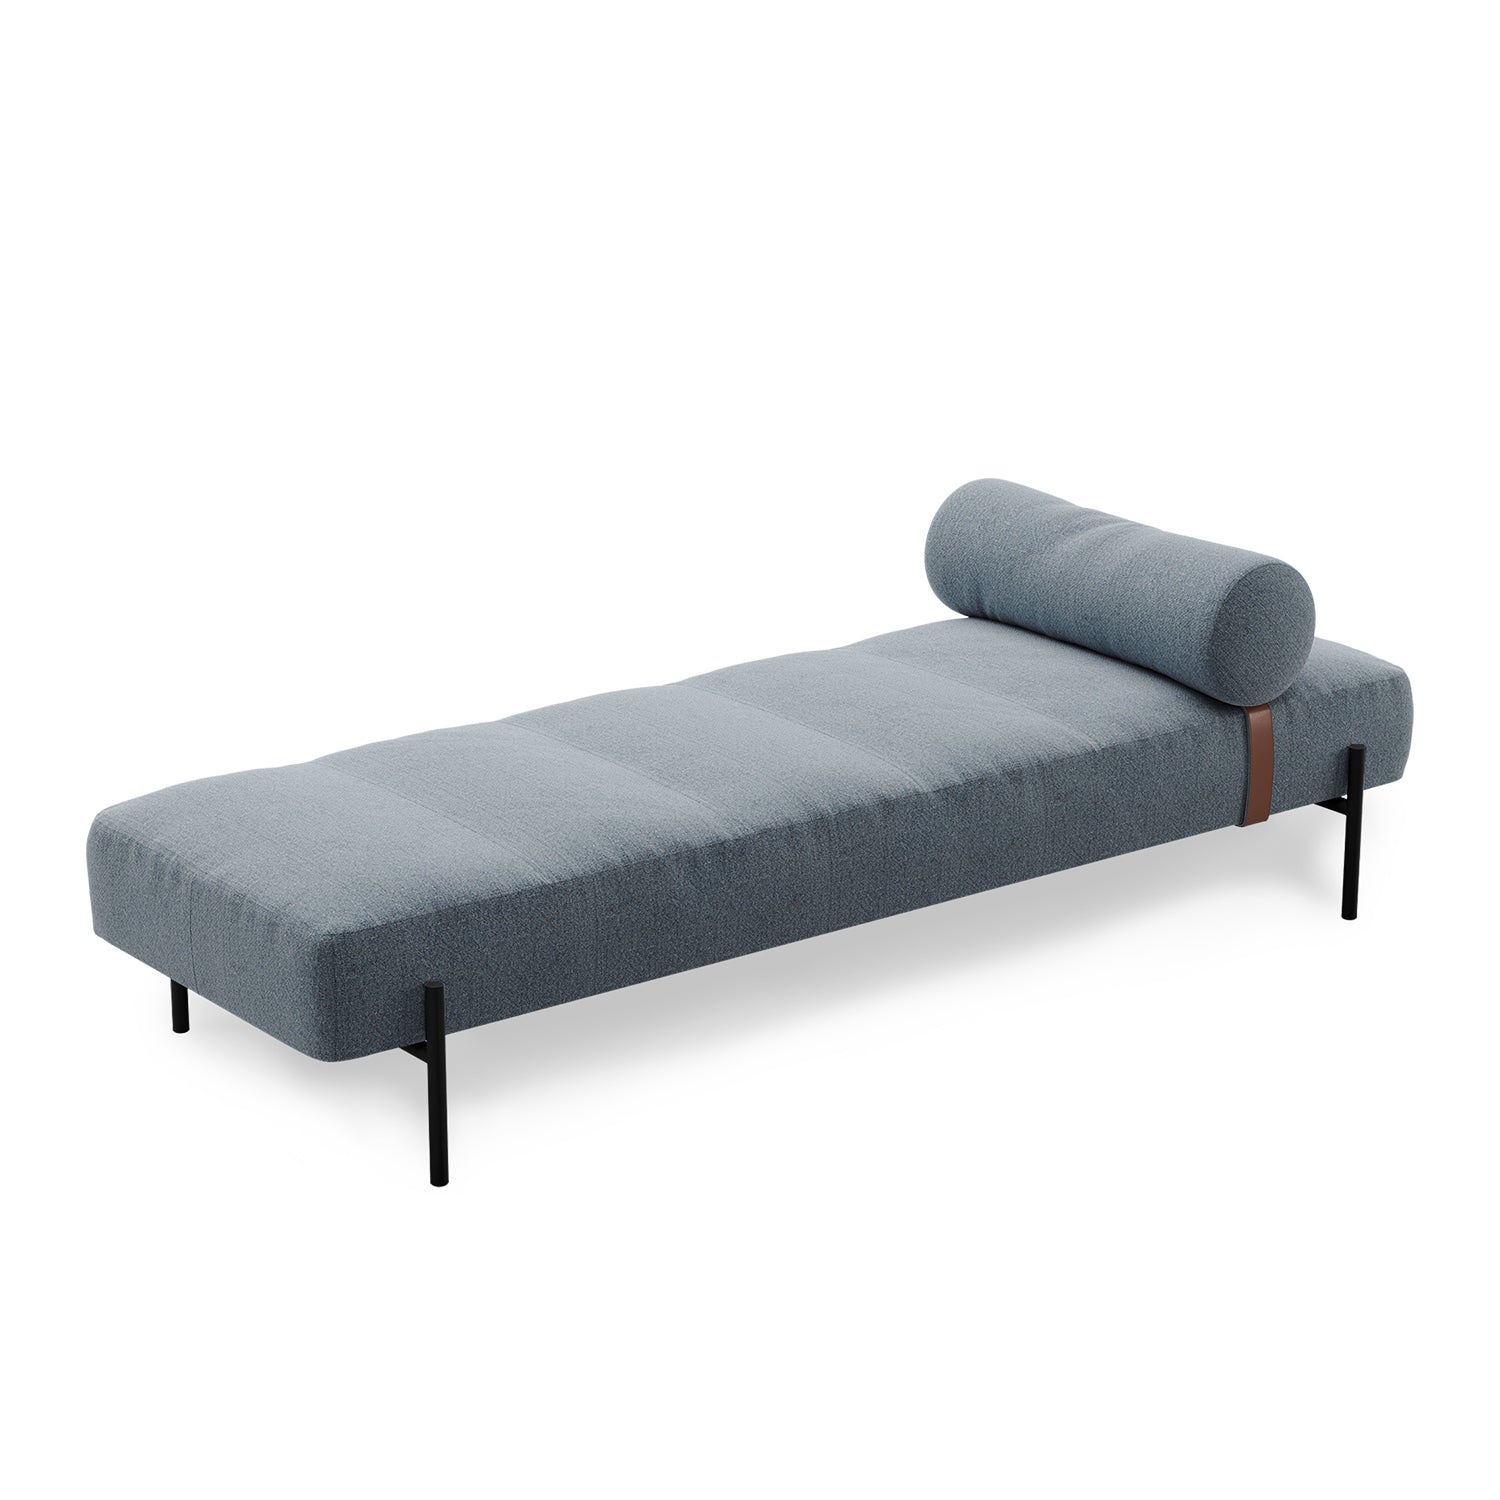 Northern Daybe Daybed in brusvik 94 and Black legs